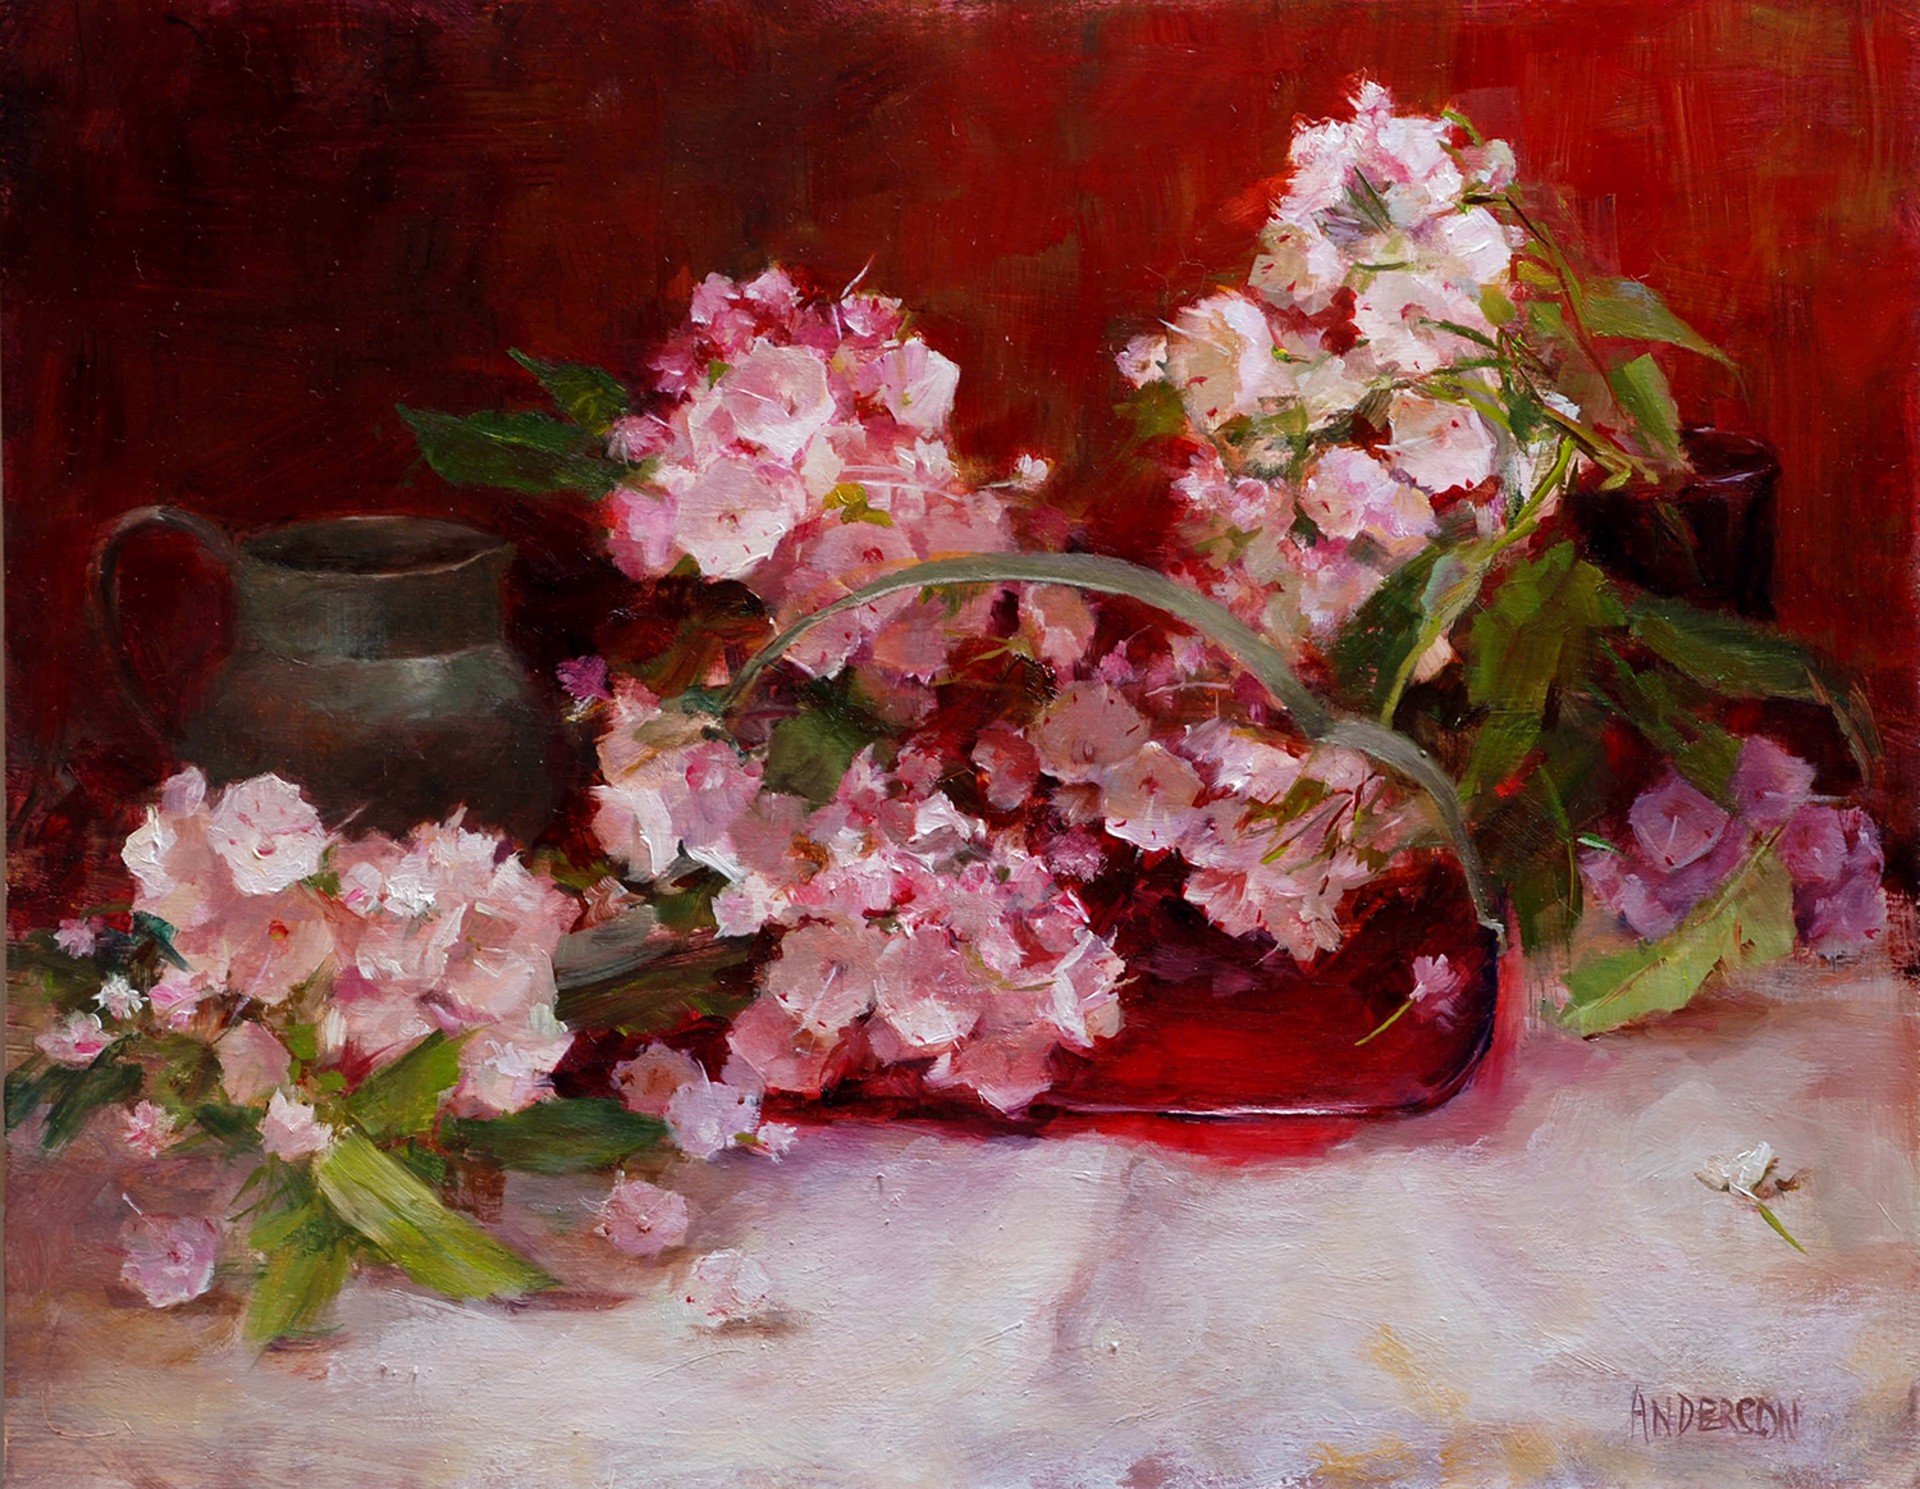 Kathy Anderson, OPAM "Ruby and Mountain Laurel" by Oil Painters of America